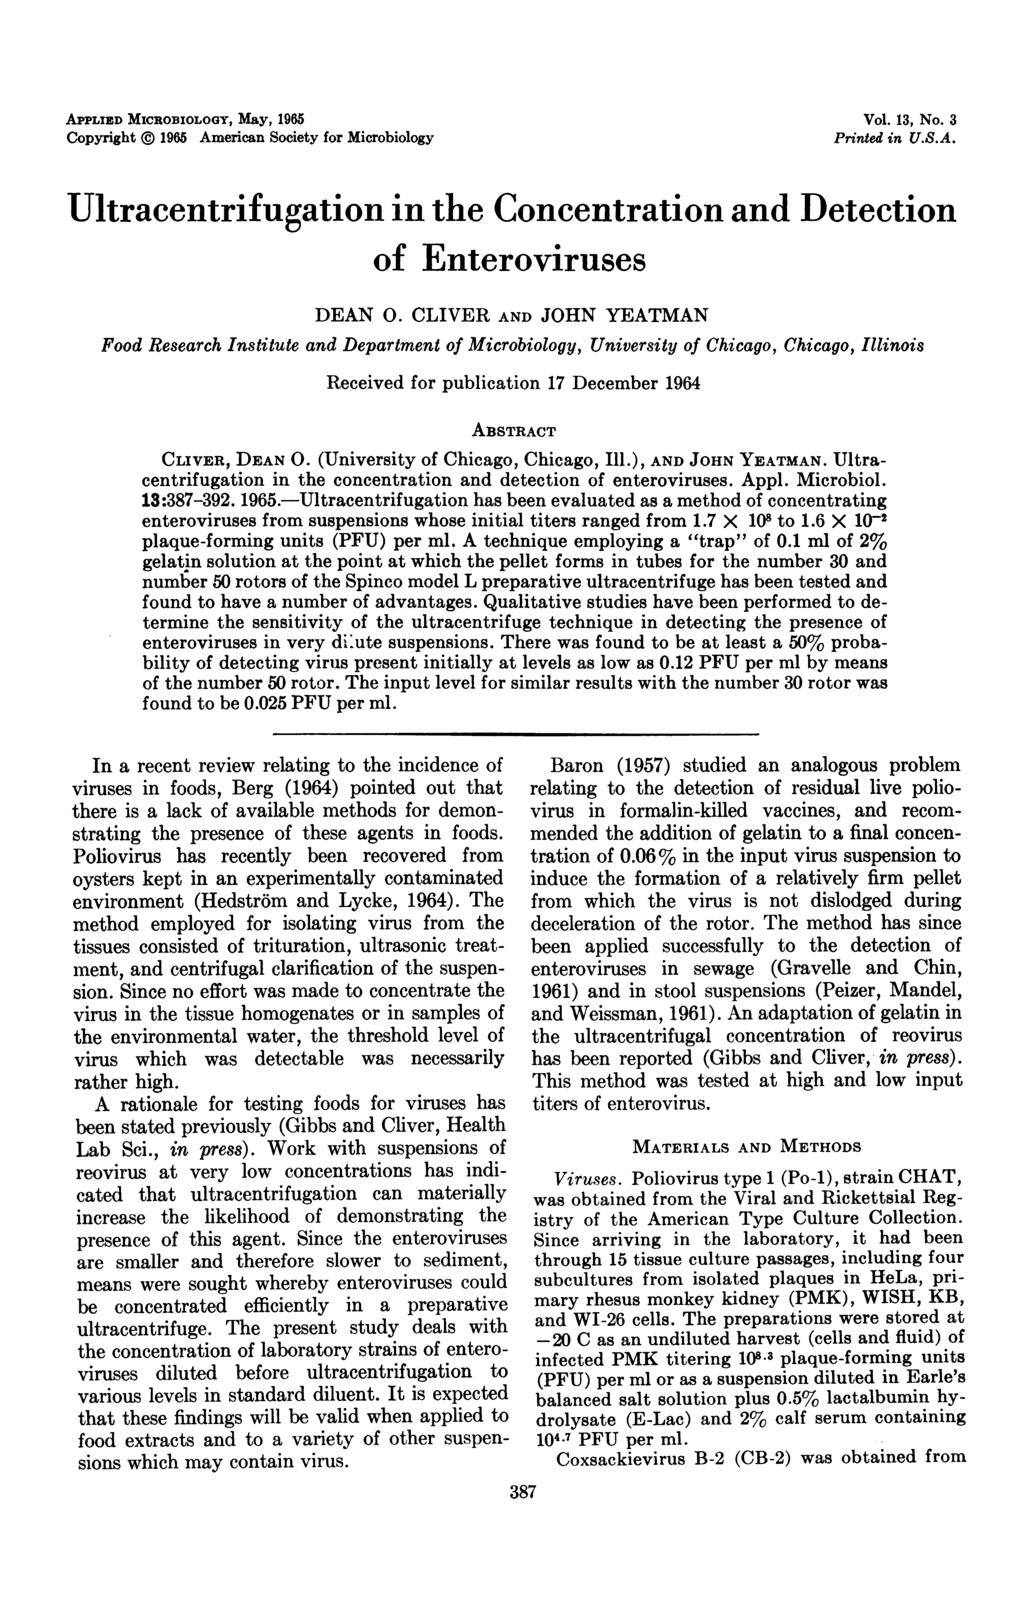 APPLIED MICROBIOLOGY, May, 95 Copyright 95 American Society for Microbiology Vol. 3, No. 3 Printed in U.S.A. Ultracentrifugation in the Concentration and Detection of Enteroviruses DEAN 0.